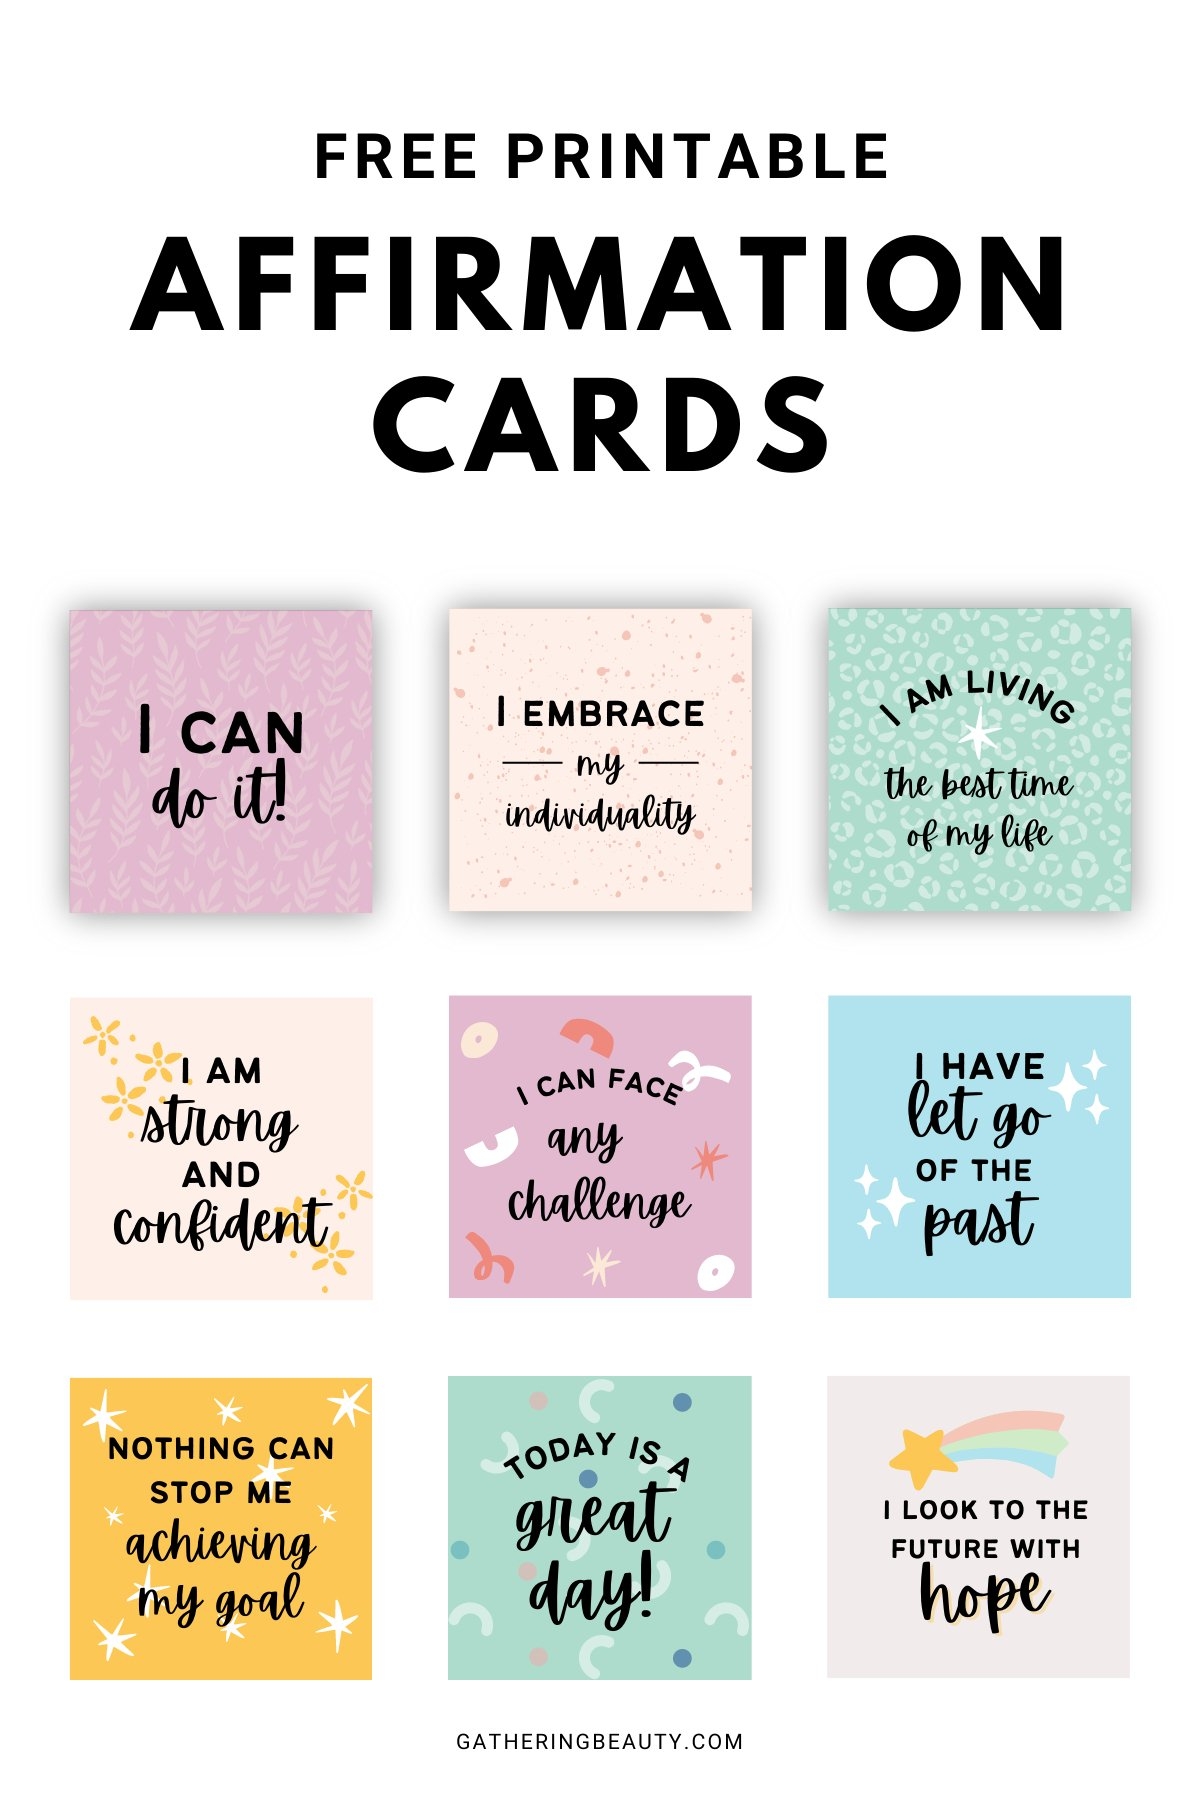 Affirmation Cards Free Printable Gathering Beauty